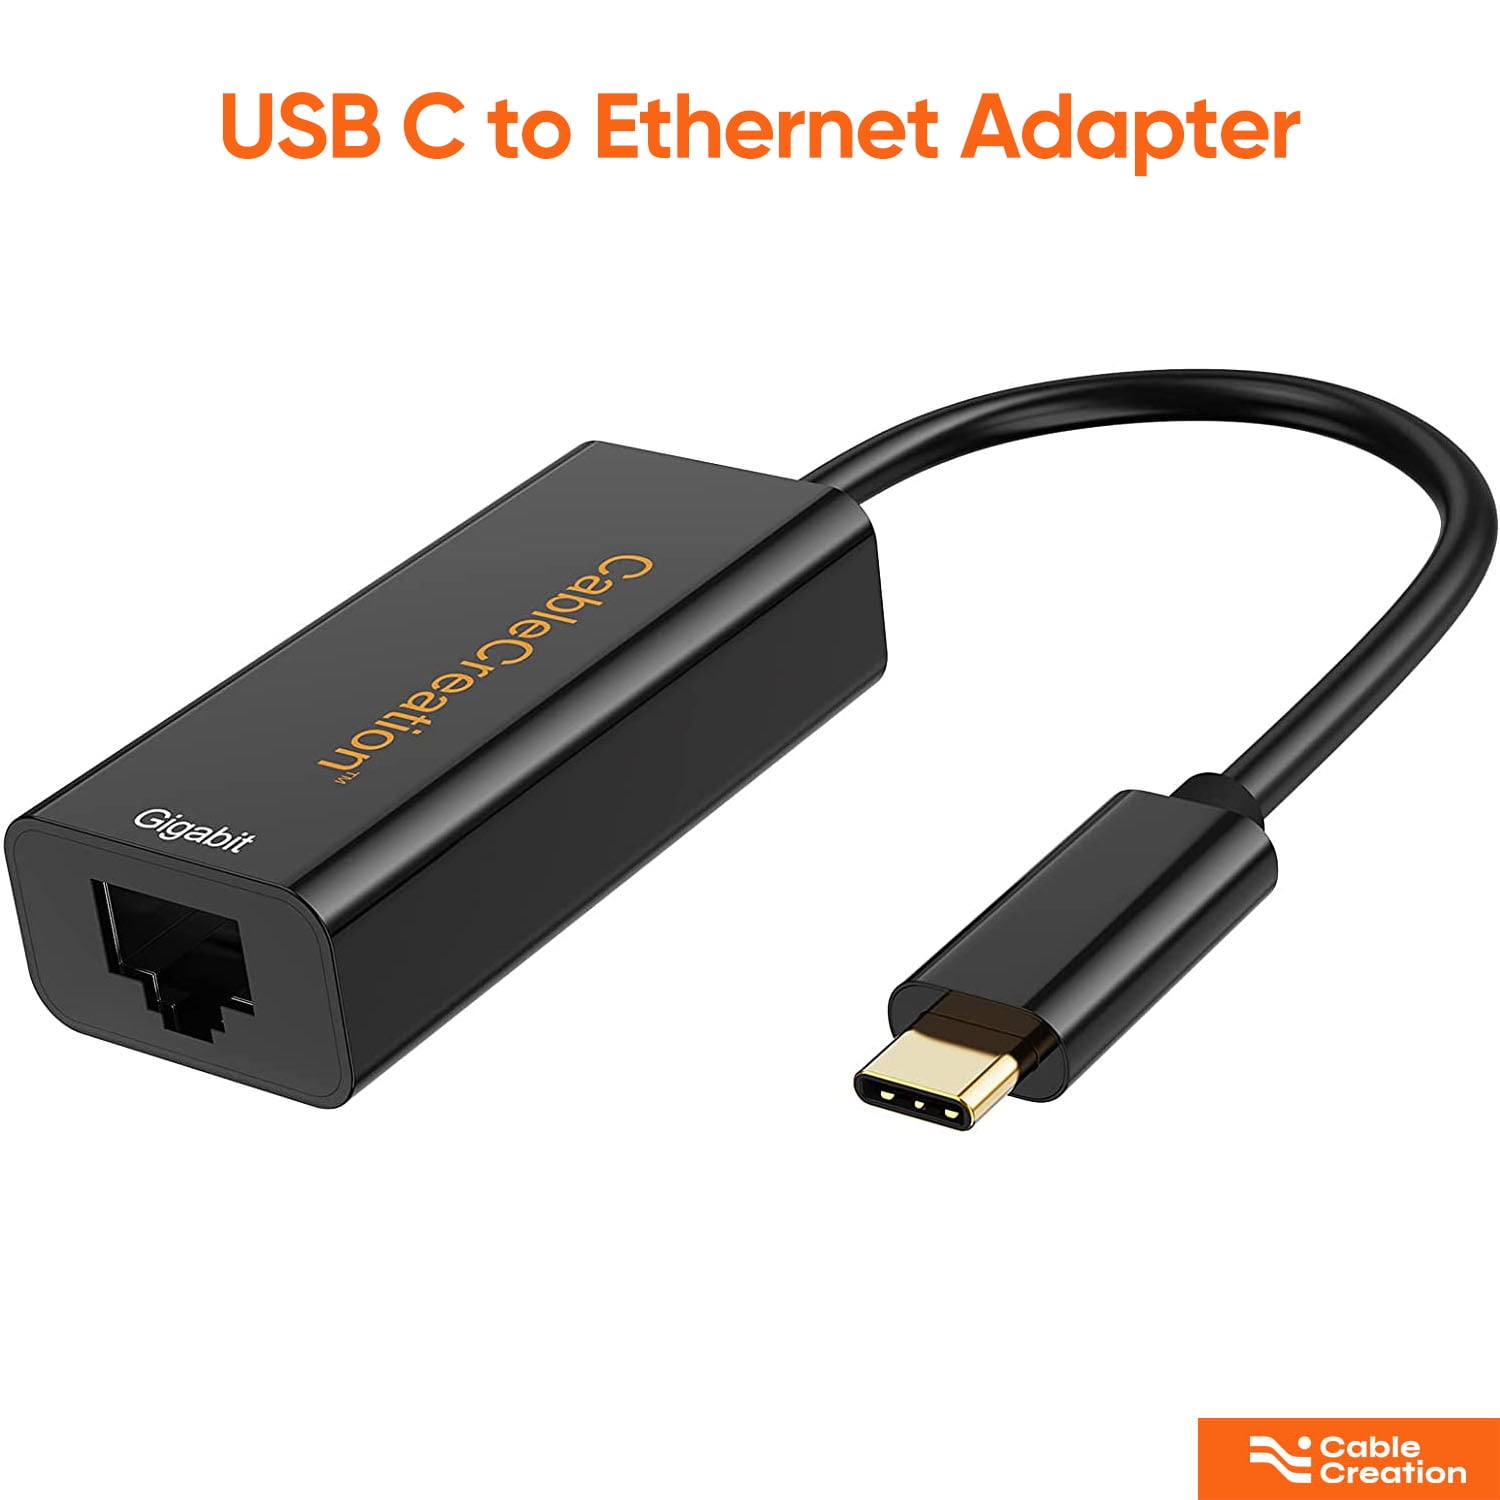 CableCreation USB Ethernet Adapter, USB Type C to RJ45 Gigabit LAN Network Adapter, Supporting 10/100/1000 Mbps, Compatible with MacBook , iPad, Nintendo Switch - Walmart.com